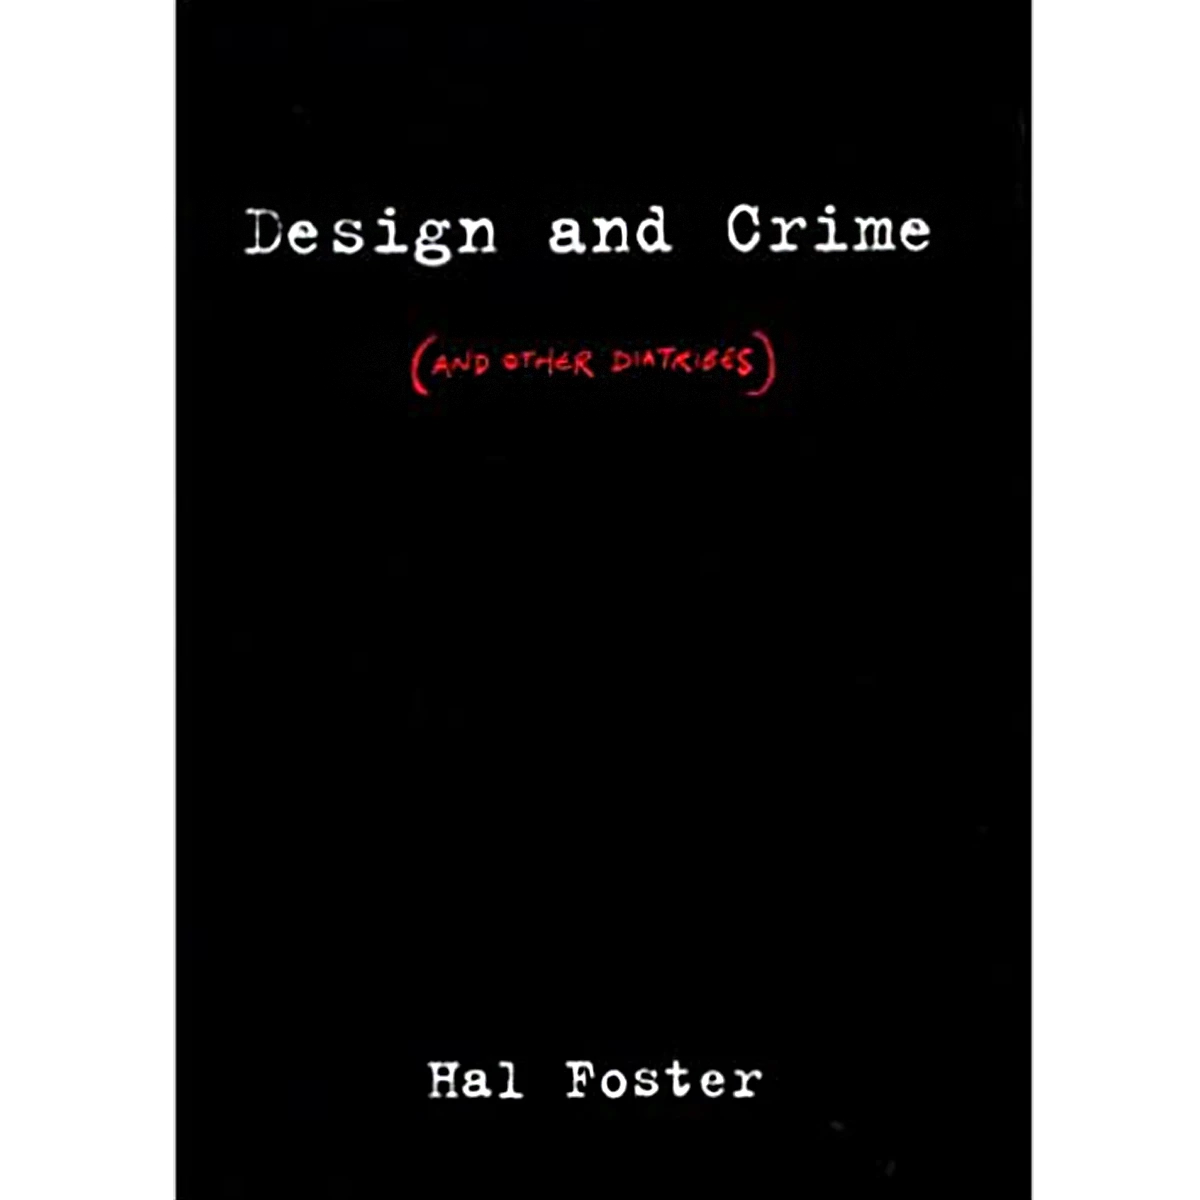 Design and Crime (and Other Diatribes)